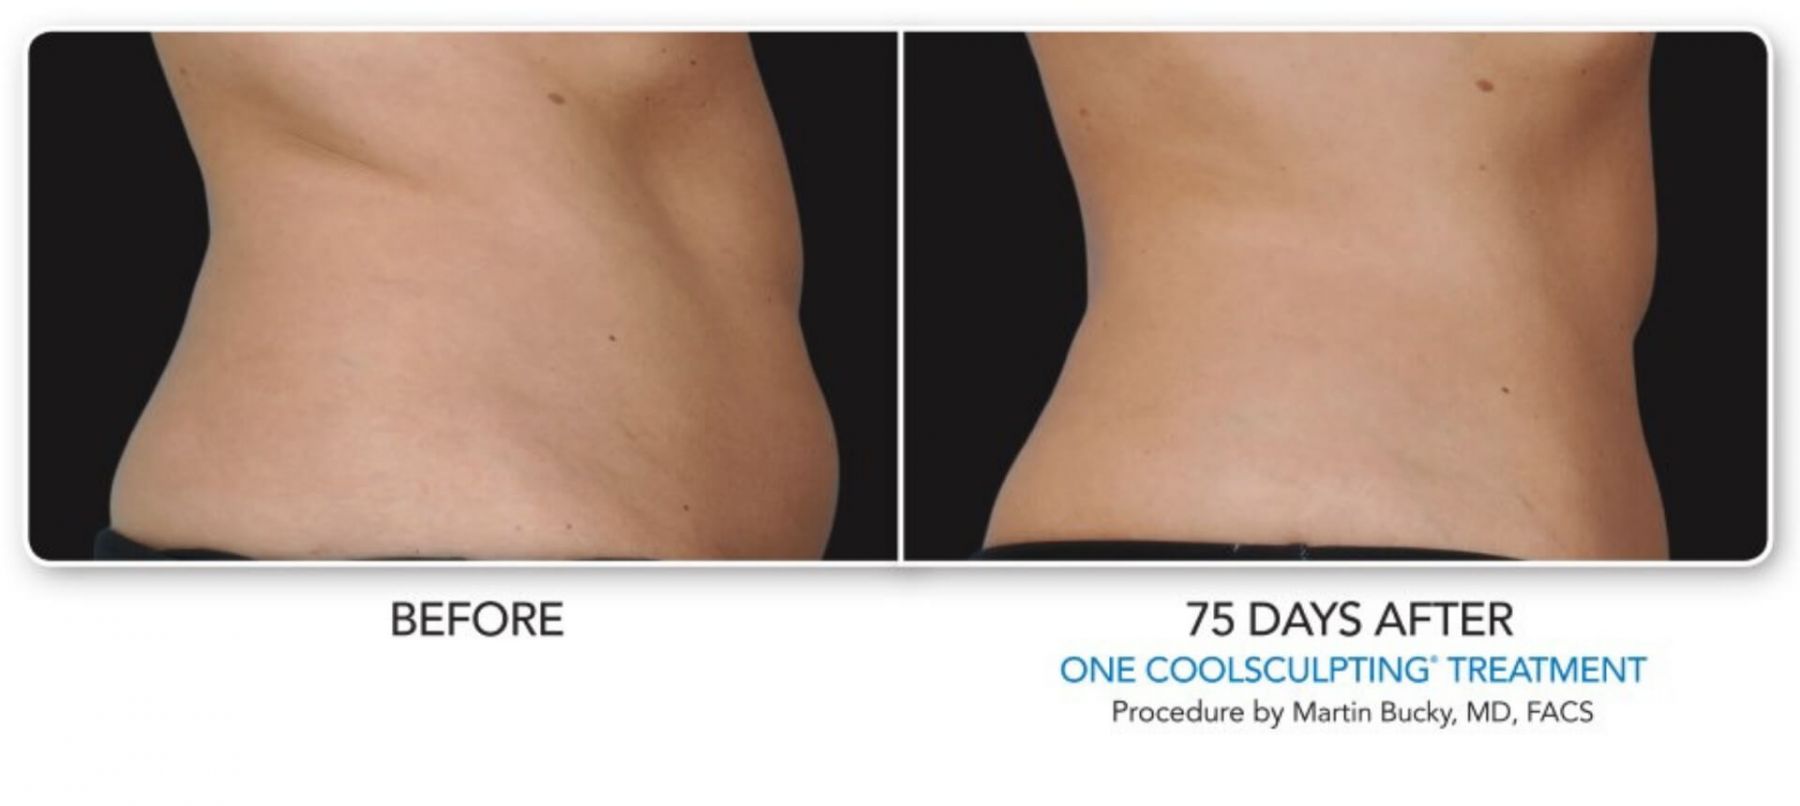 coolsculpting-before-and-after-9